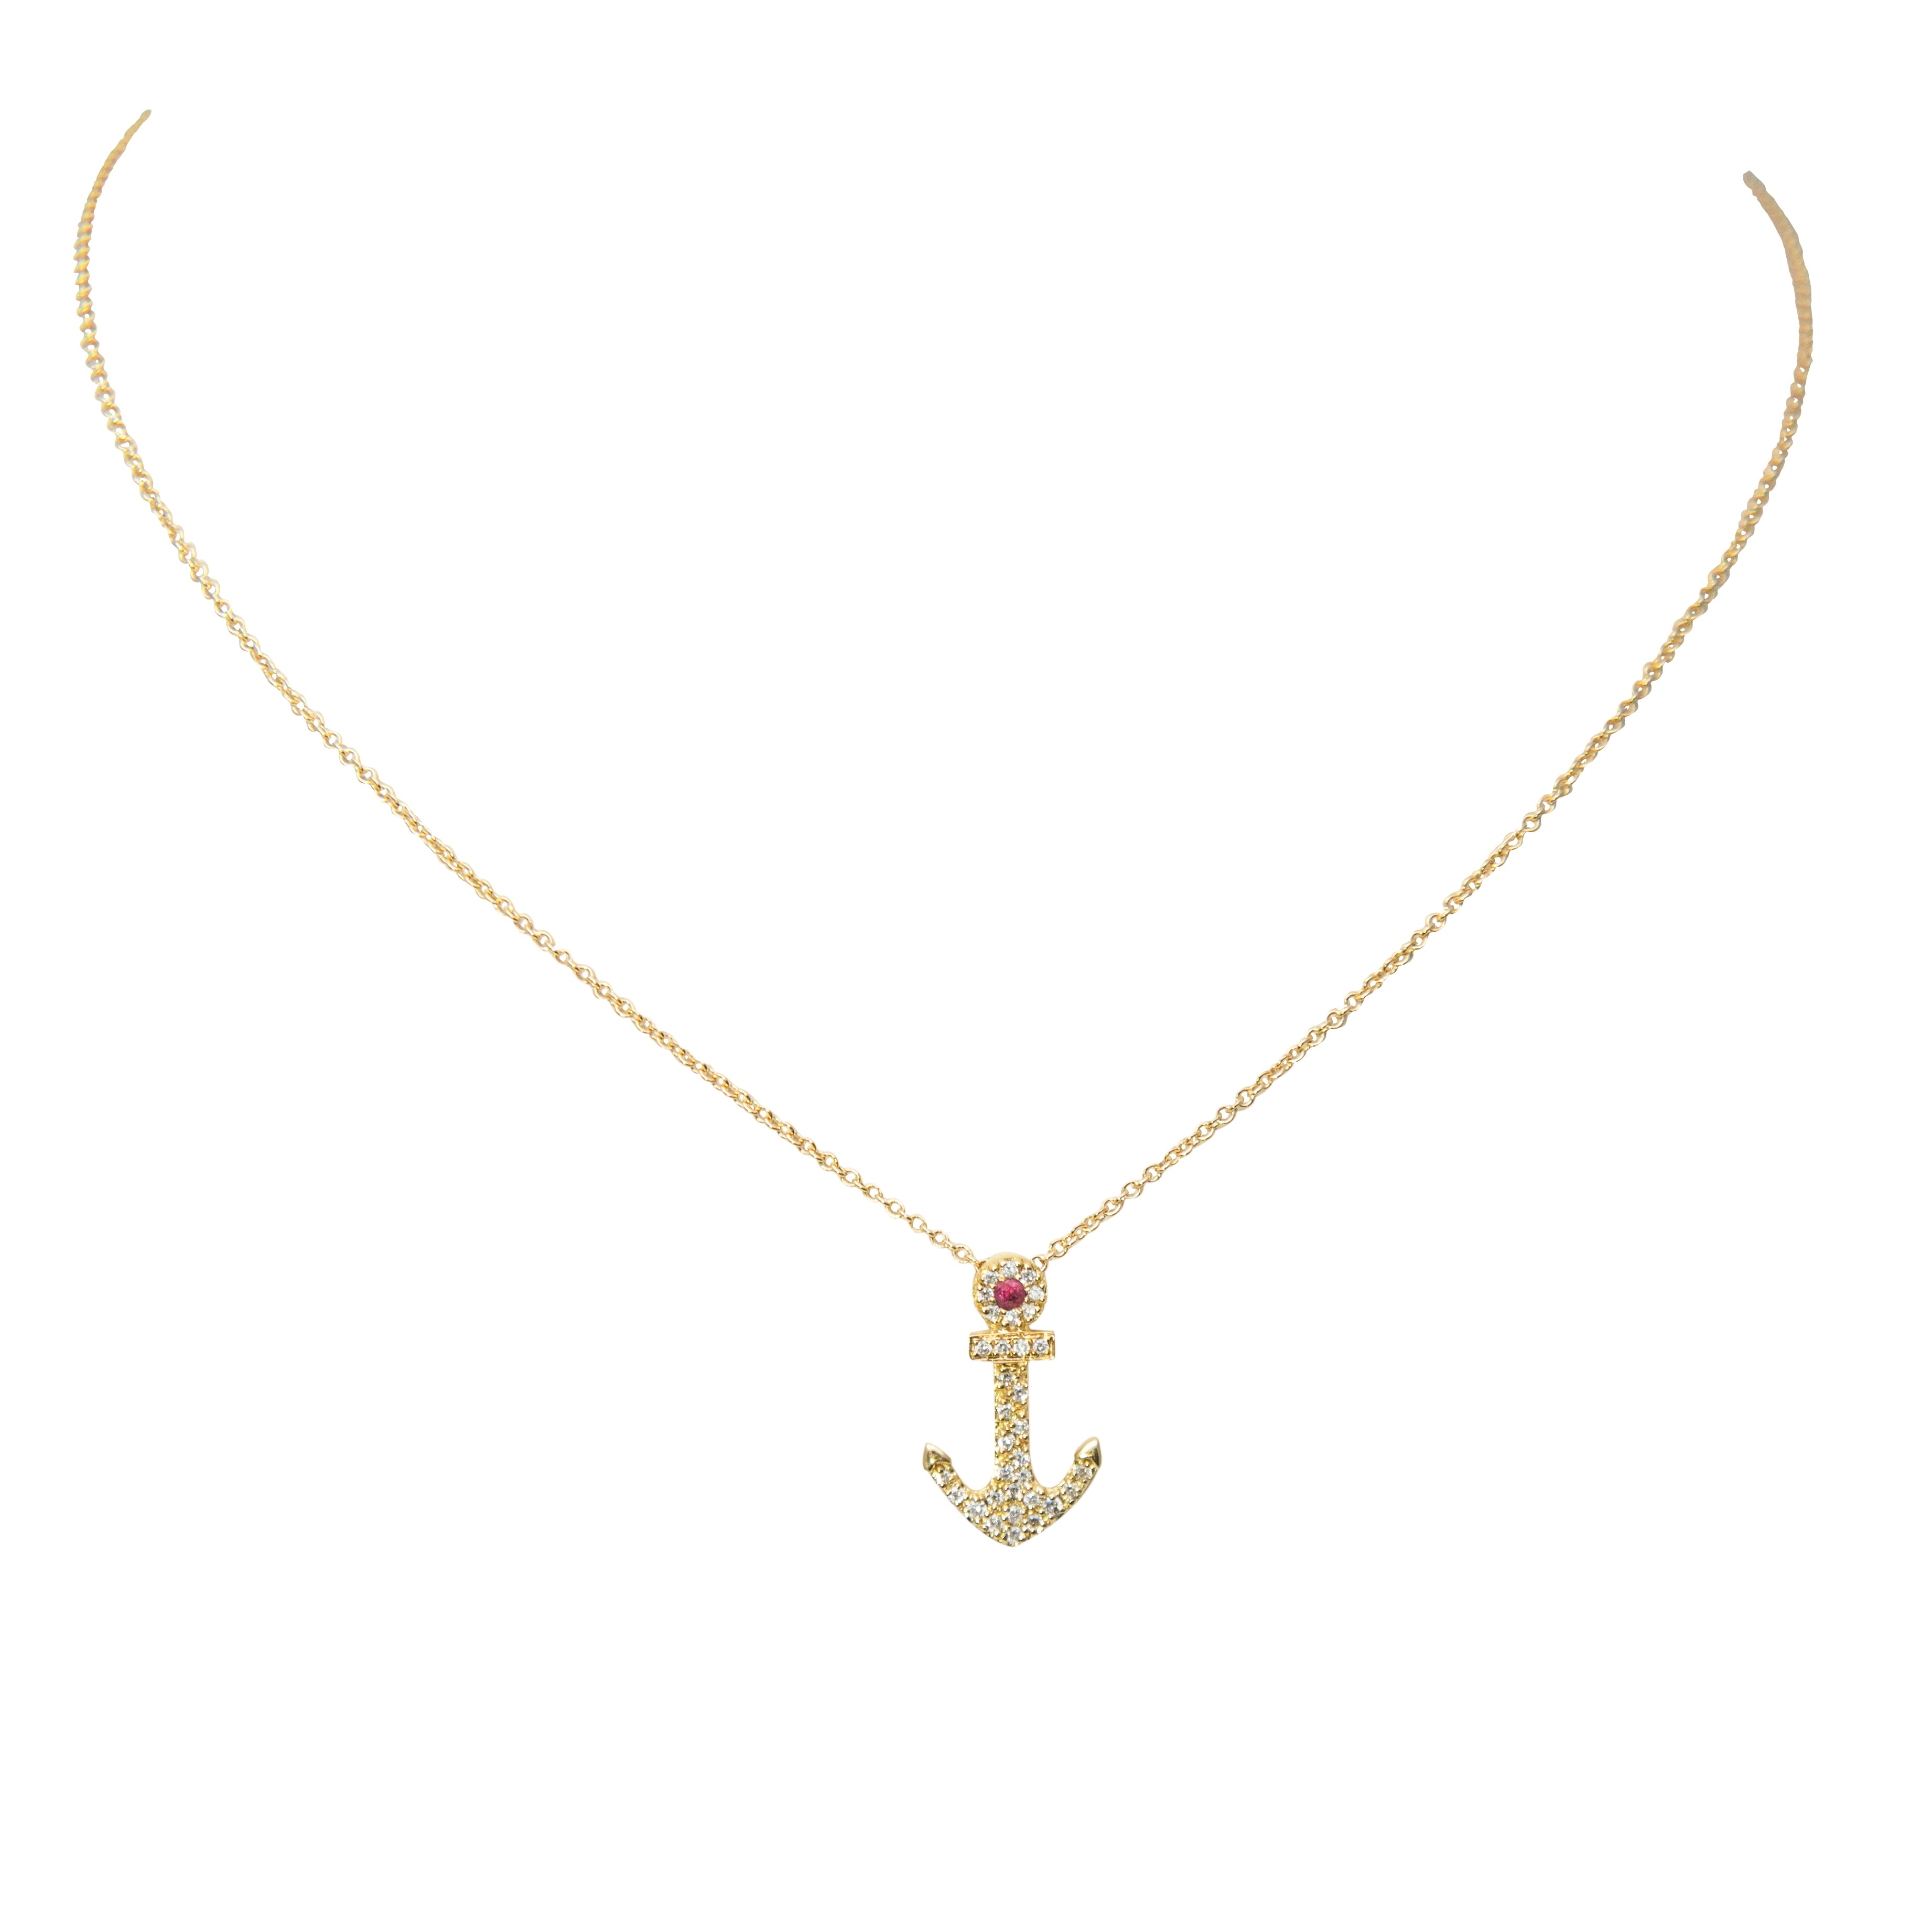 Gleaming 18K yellow gold encases a diamond-studded, ruby-adorned anchor pendant, suspended by a secure 16" yellow gold chain. 0.12cts of diamond and one small ruby sparkle within the intricately-crafted bail, creating a stunning addition to any look.